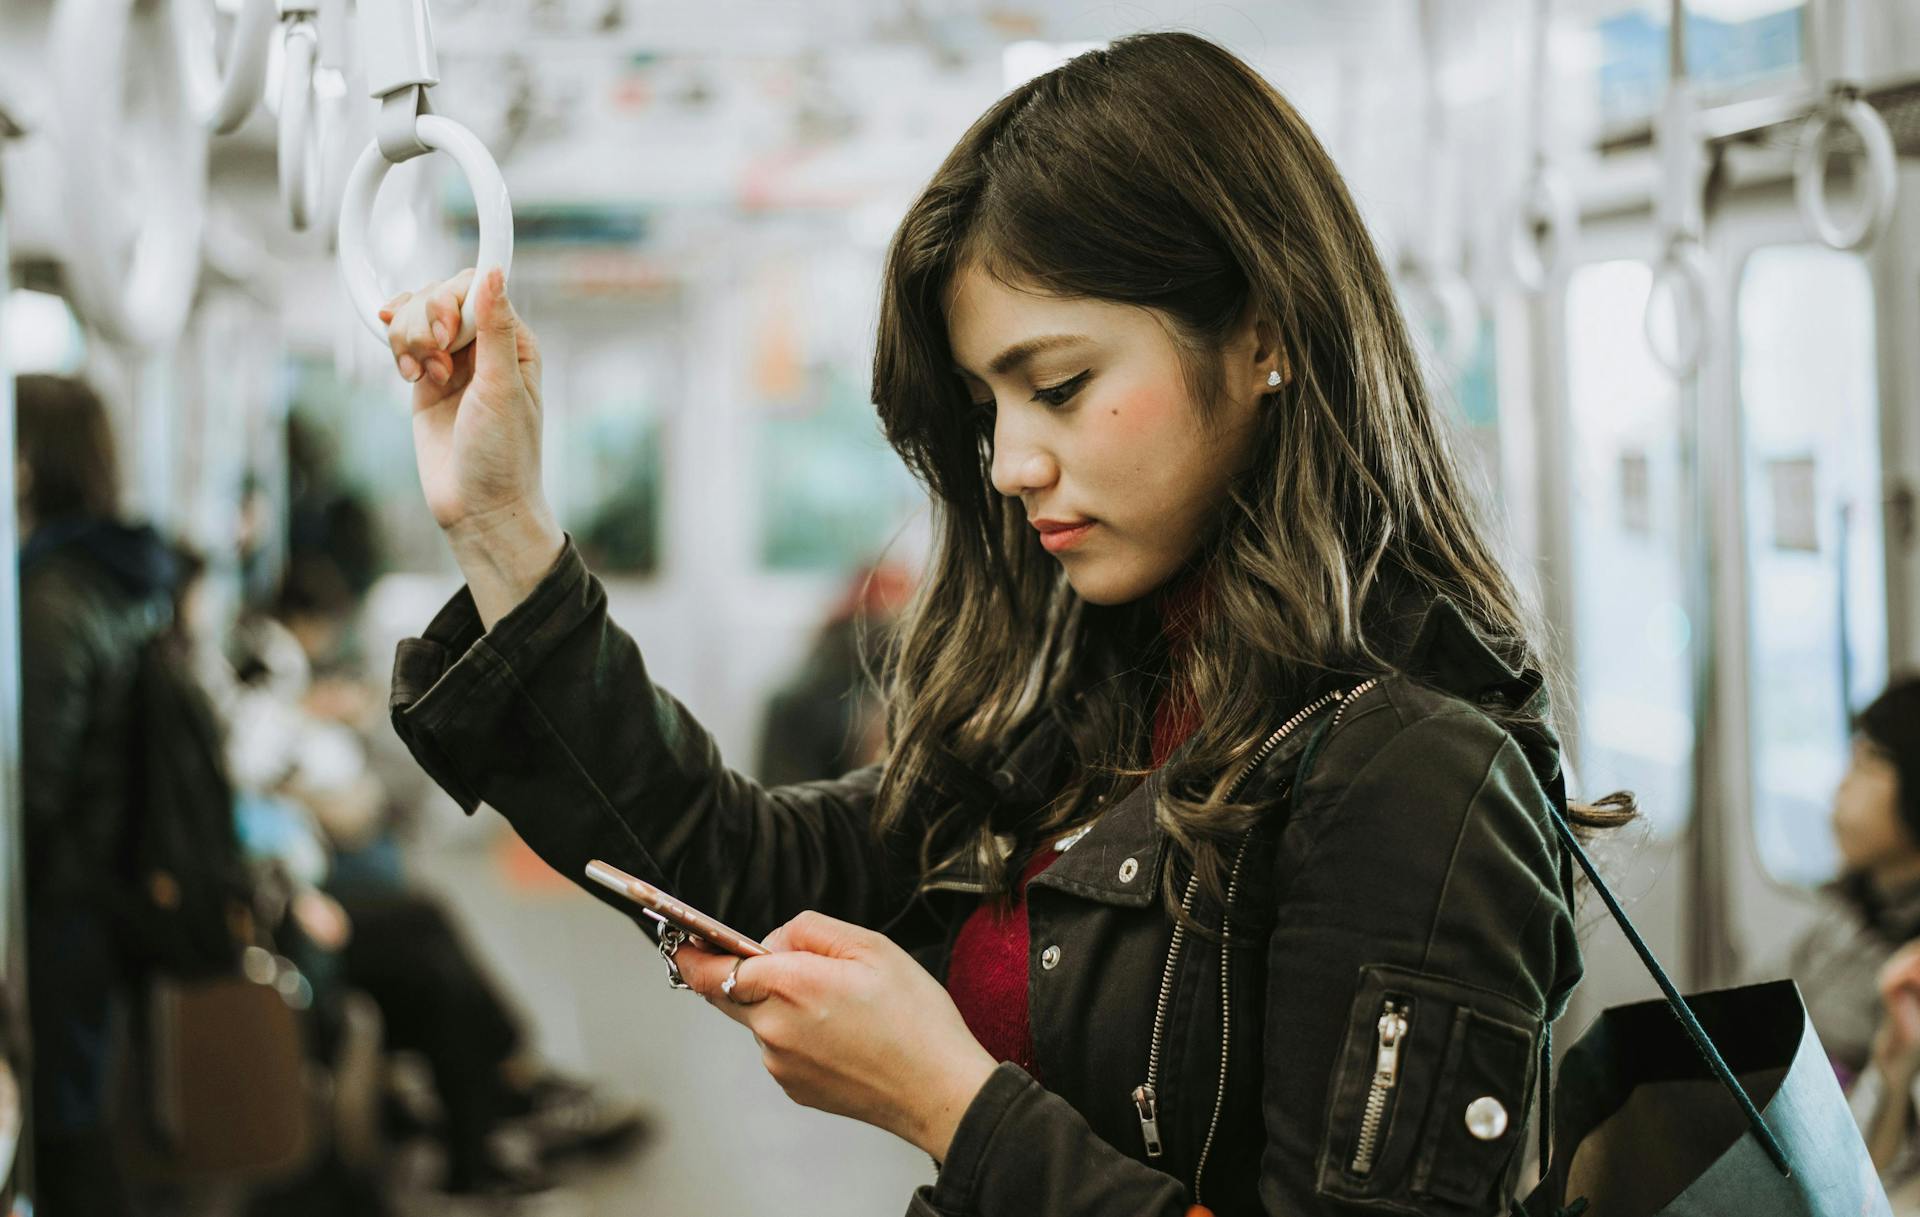 Japanese woman checking her phone in a train in Japan. 